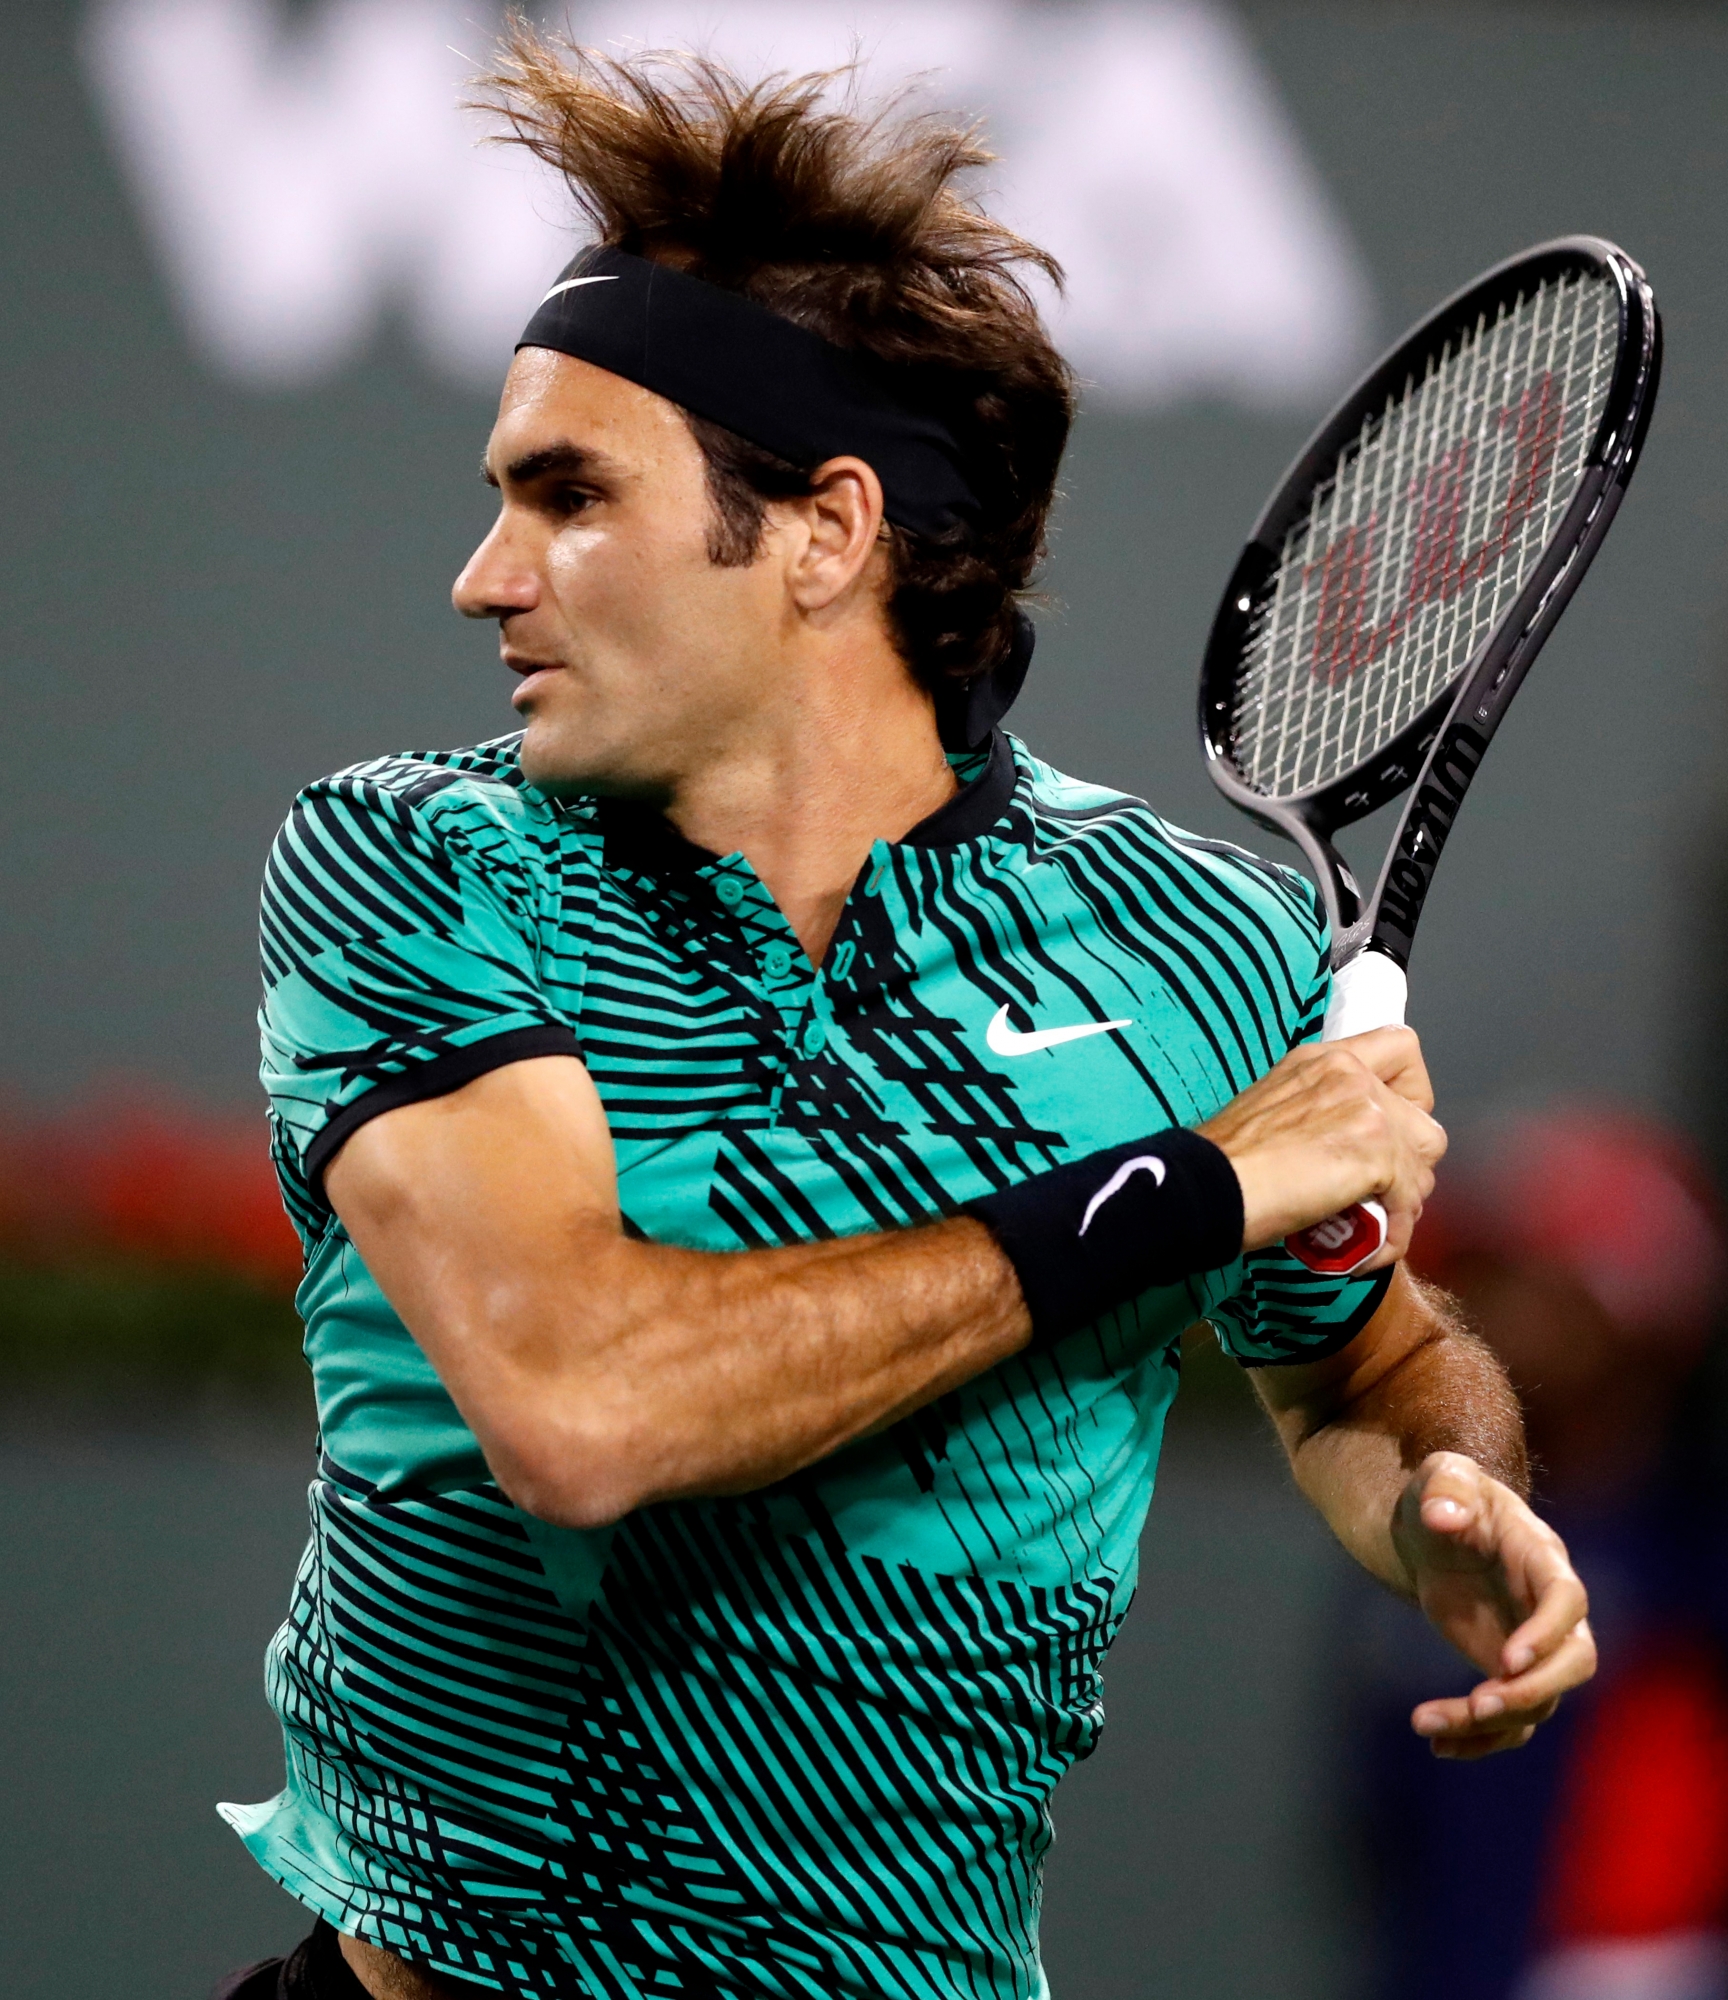 epa05845192 Roger Federer of Switzerland in action against Stephane Robert of France during their match at the 2017 BNP Paribas Open tennis tournament at the Indian Wells Tennis Garden in Indian Wells, California, USA, 12 March 2017. Federer won the match.  EPA/PAUL BUCK USA TENNIS BNP PARIBAS OPEN